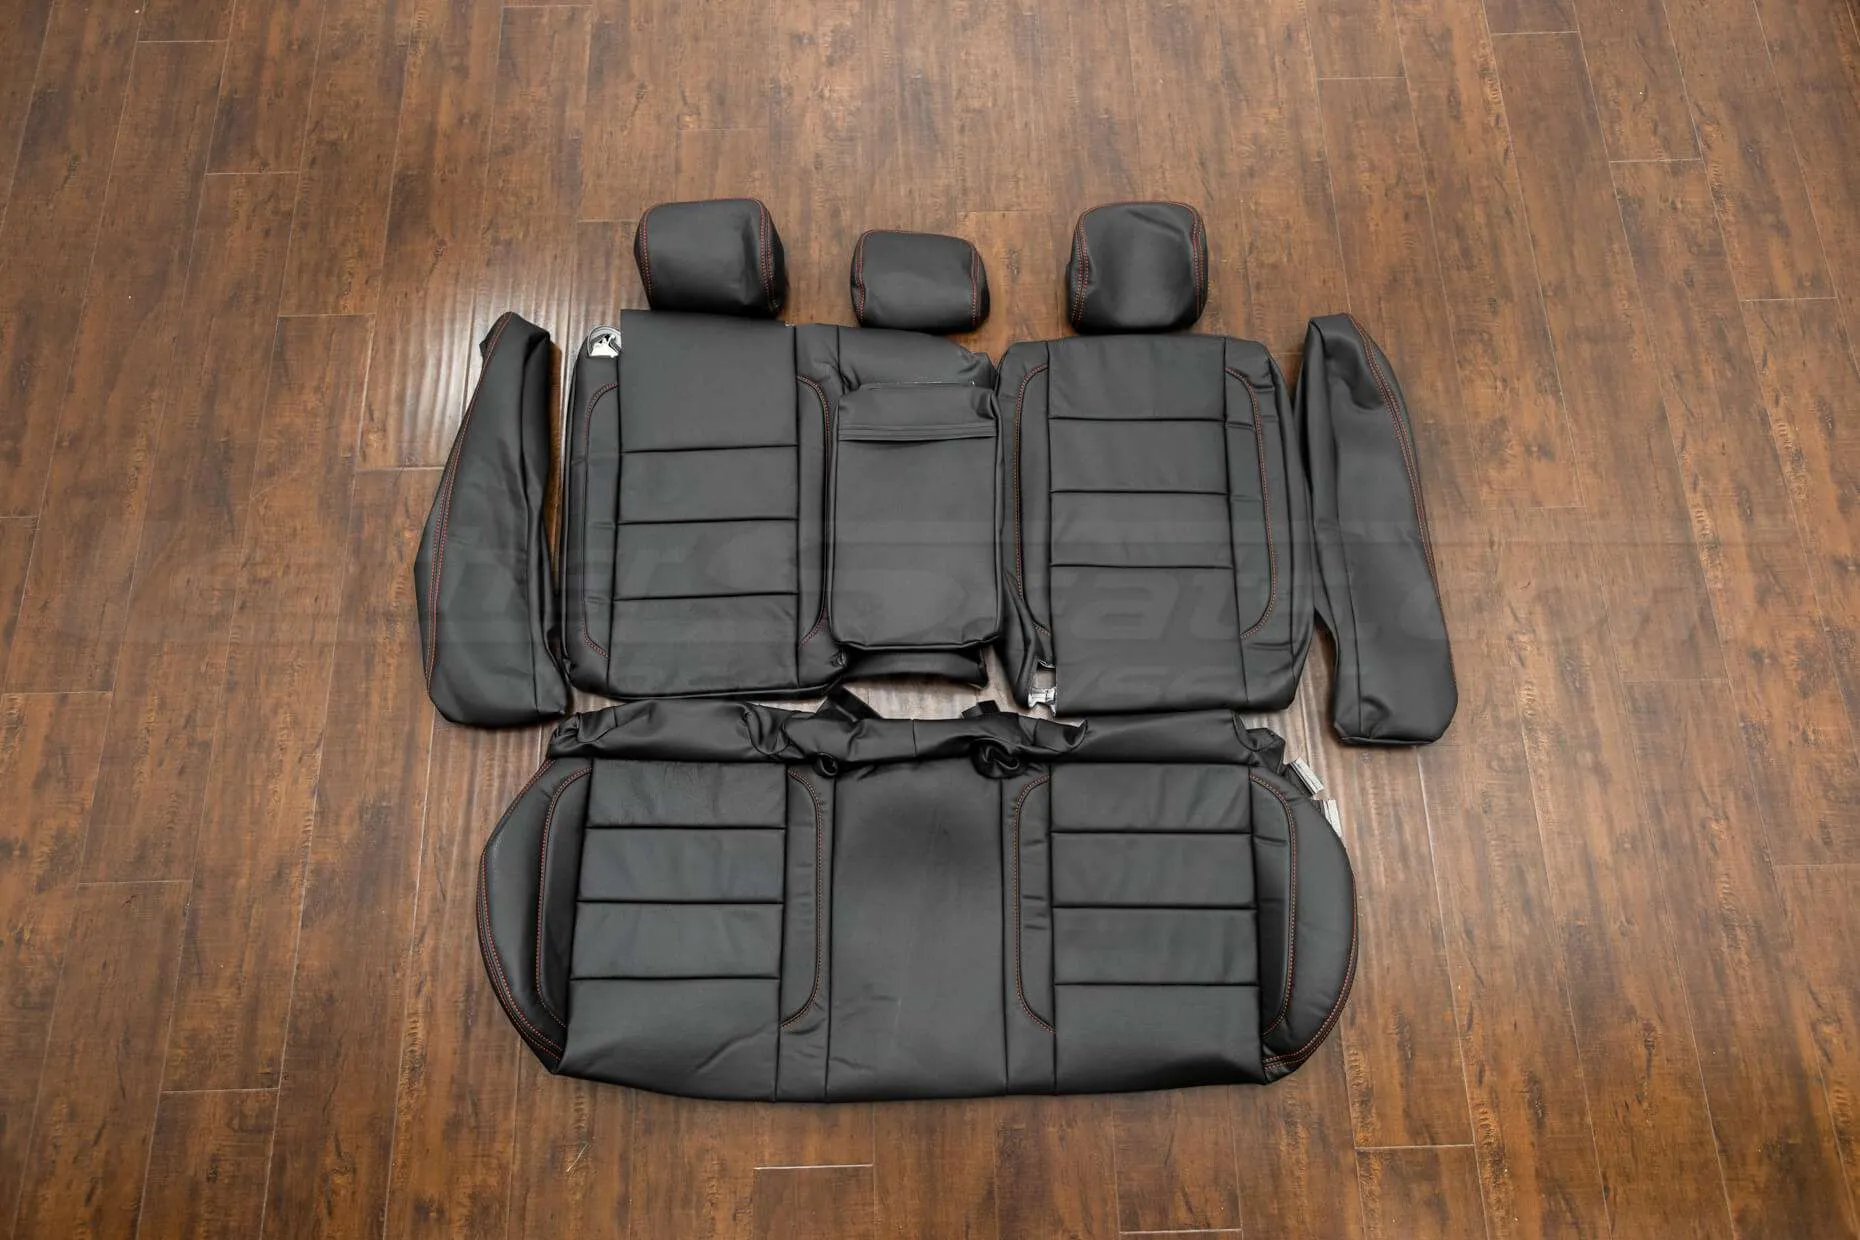 2006-2008 Volkswagen Jetta Leather Kit - Black - Rear seats with armrest and bolsters